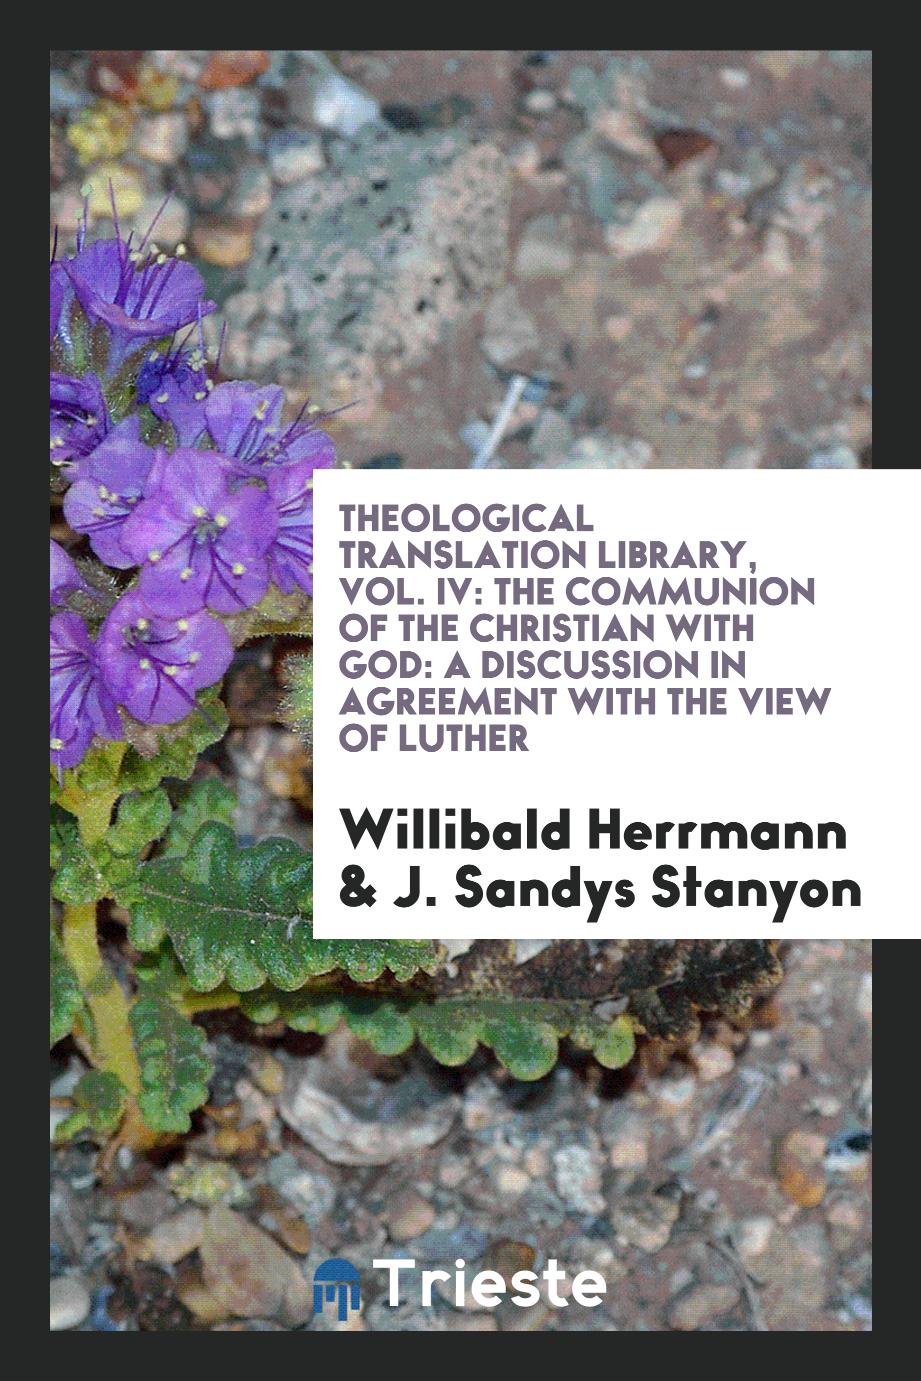 Willibald Herrmann, J. Sandys Stanyon - Theological Translation Library, Vol. IV: The Communion of the Christian with God: A Discussion in Agreement with the View of Luther